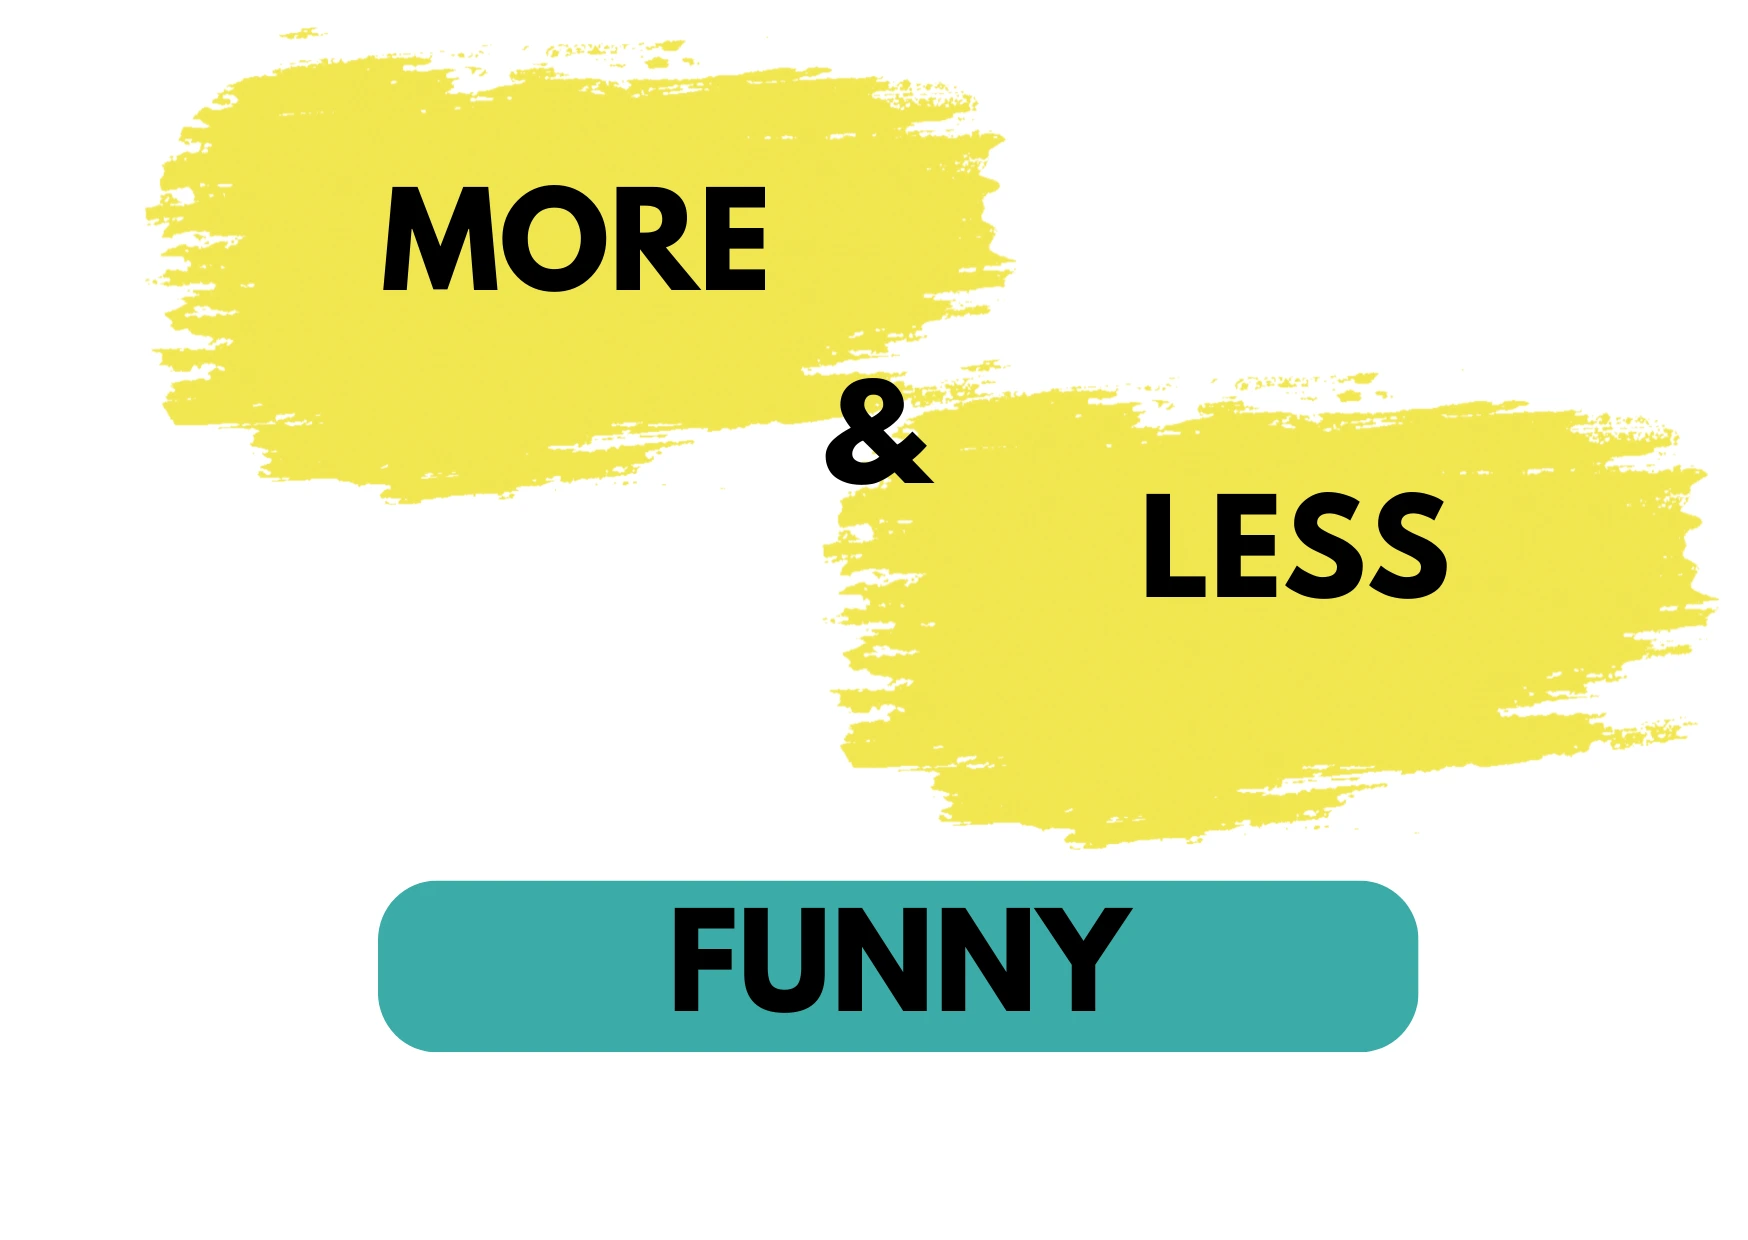 Graphic showing "More" and "Less" Funny